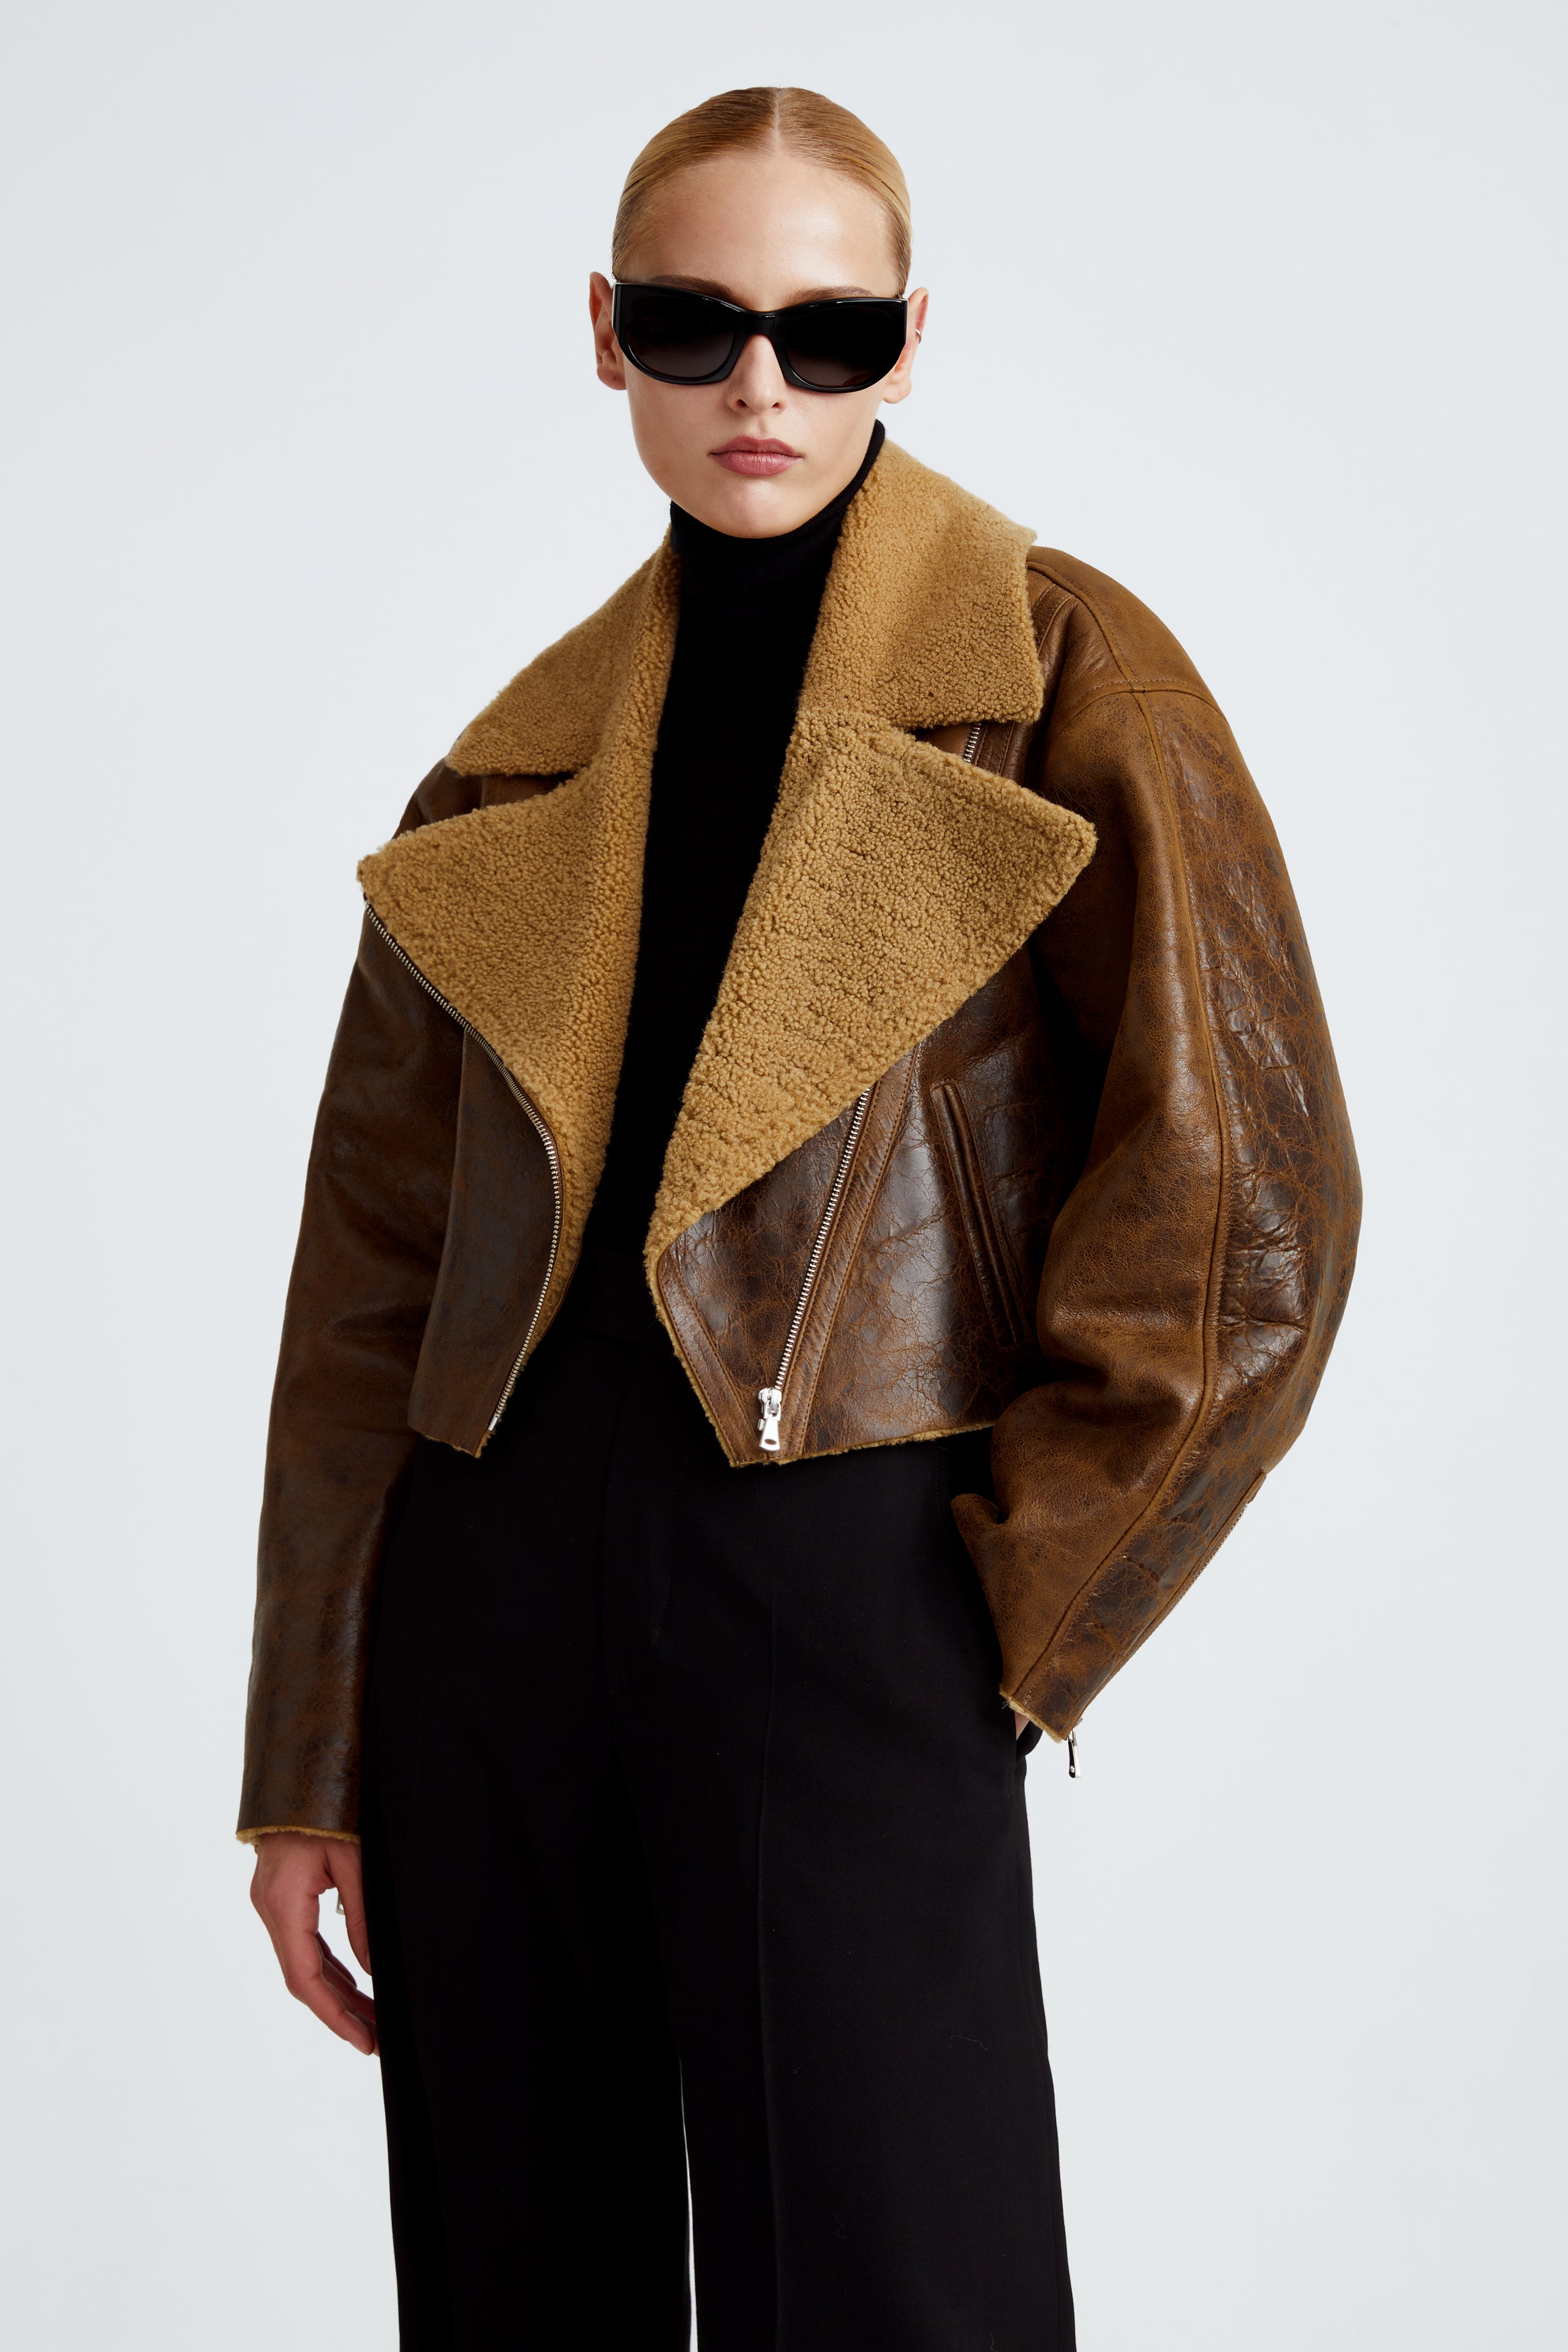 Model is wearing the Colorado Brown Caramel Relaxed Shearling Jacket Close Up